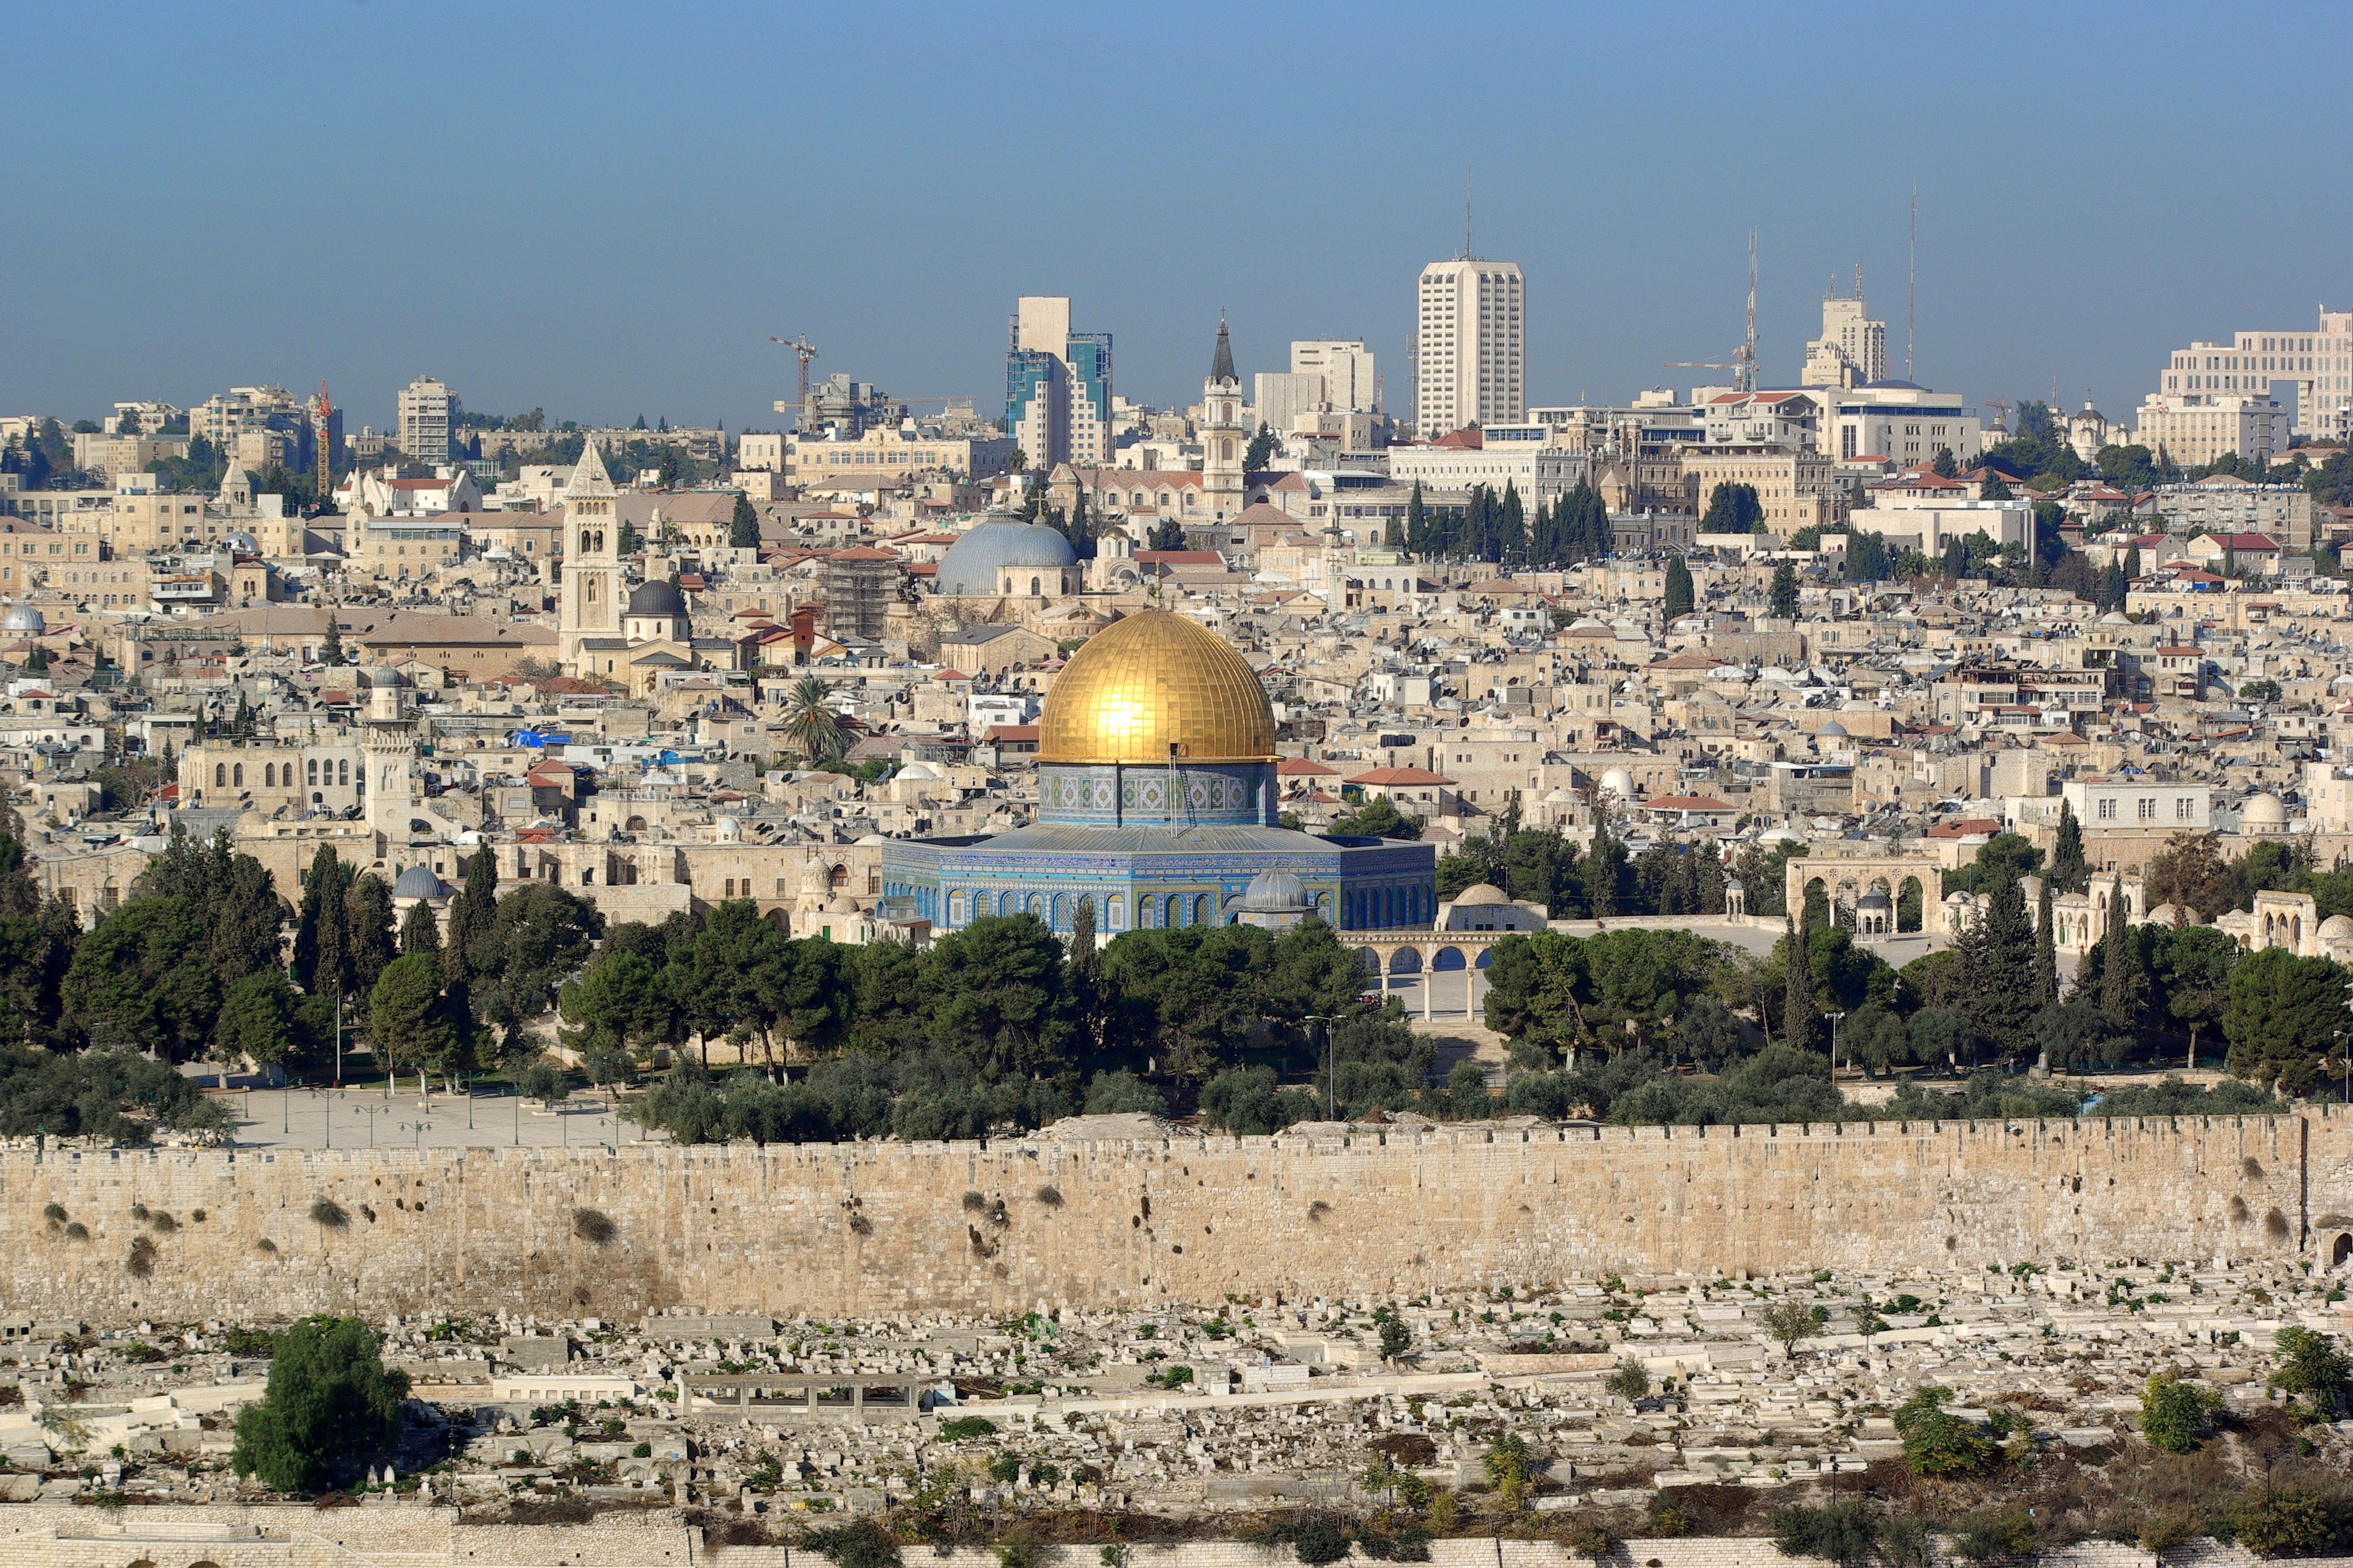 cityscape-of-the-old-city-of-jerusalem-in-israel.jpg